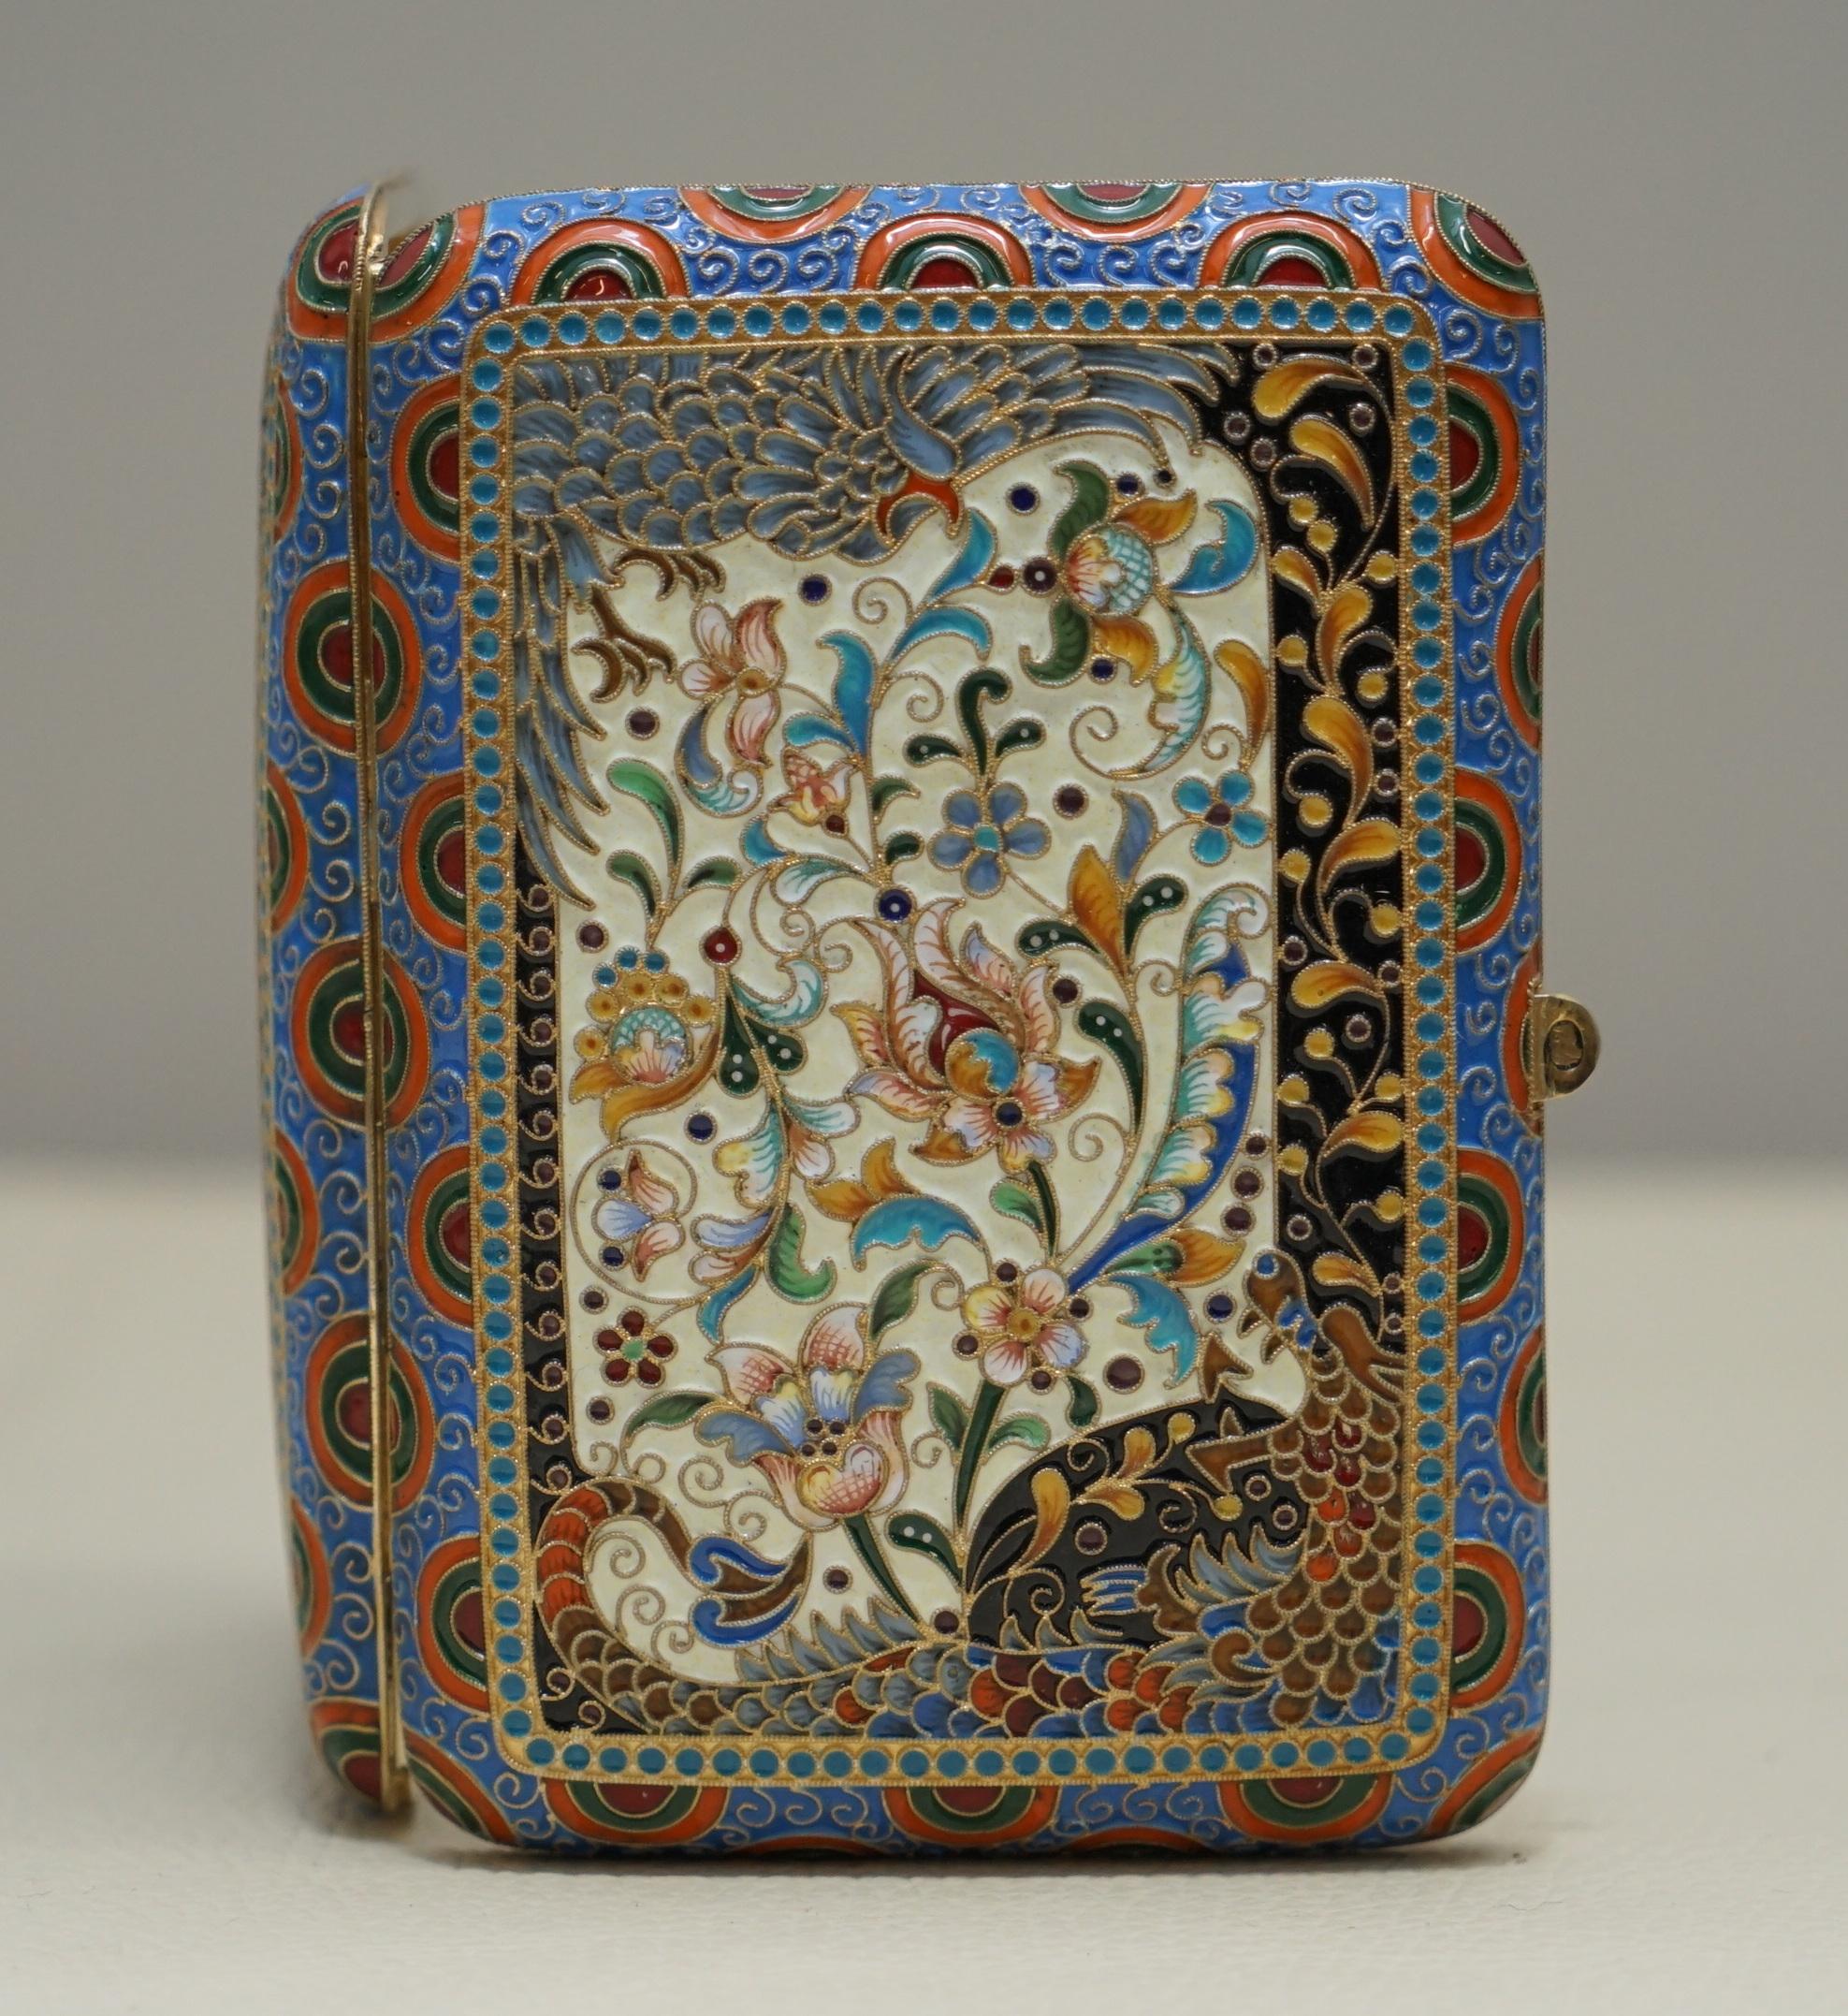 Wimbledon-Furniture

Wimbledon-Furniture is delighted to offer for sale this lovely hand made in Russia solid silver with gold gilt internals Cloisonne Enamel cigarette case

I have two of these, the other is listed under my other items for